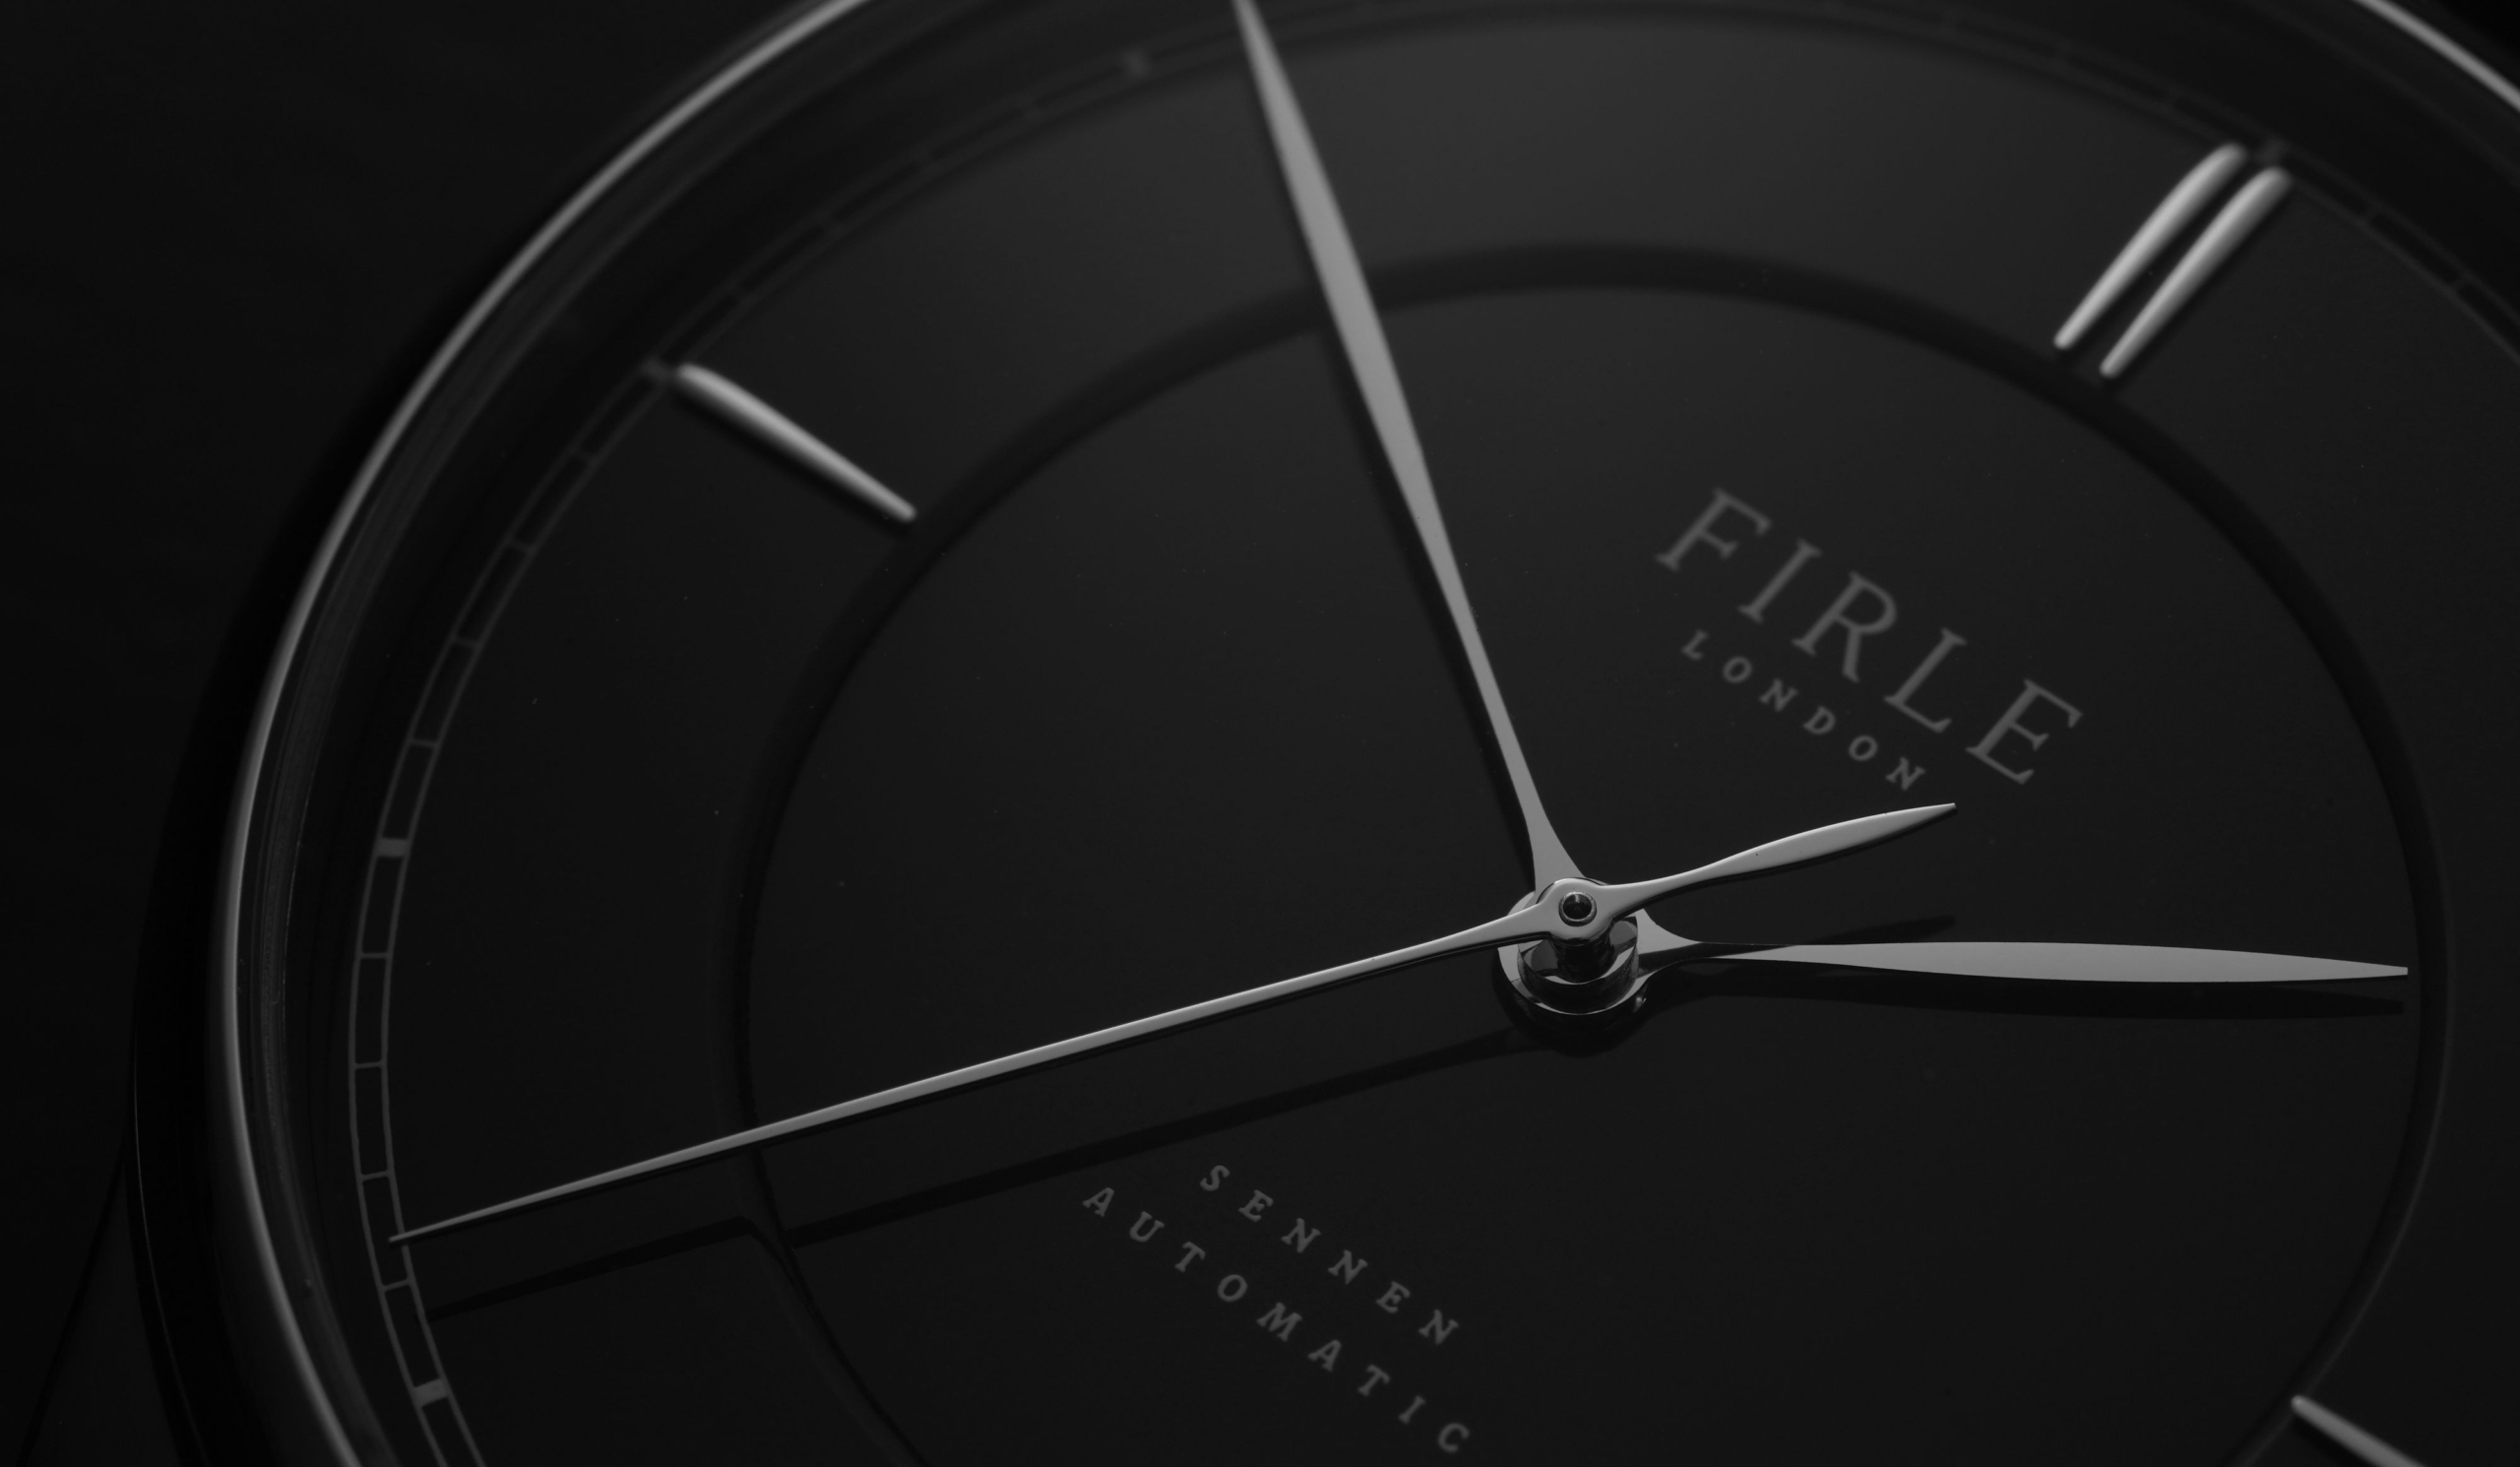 Firle Watches
